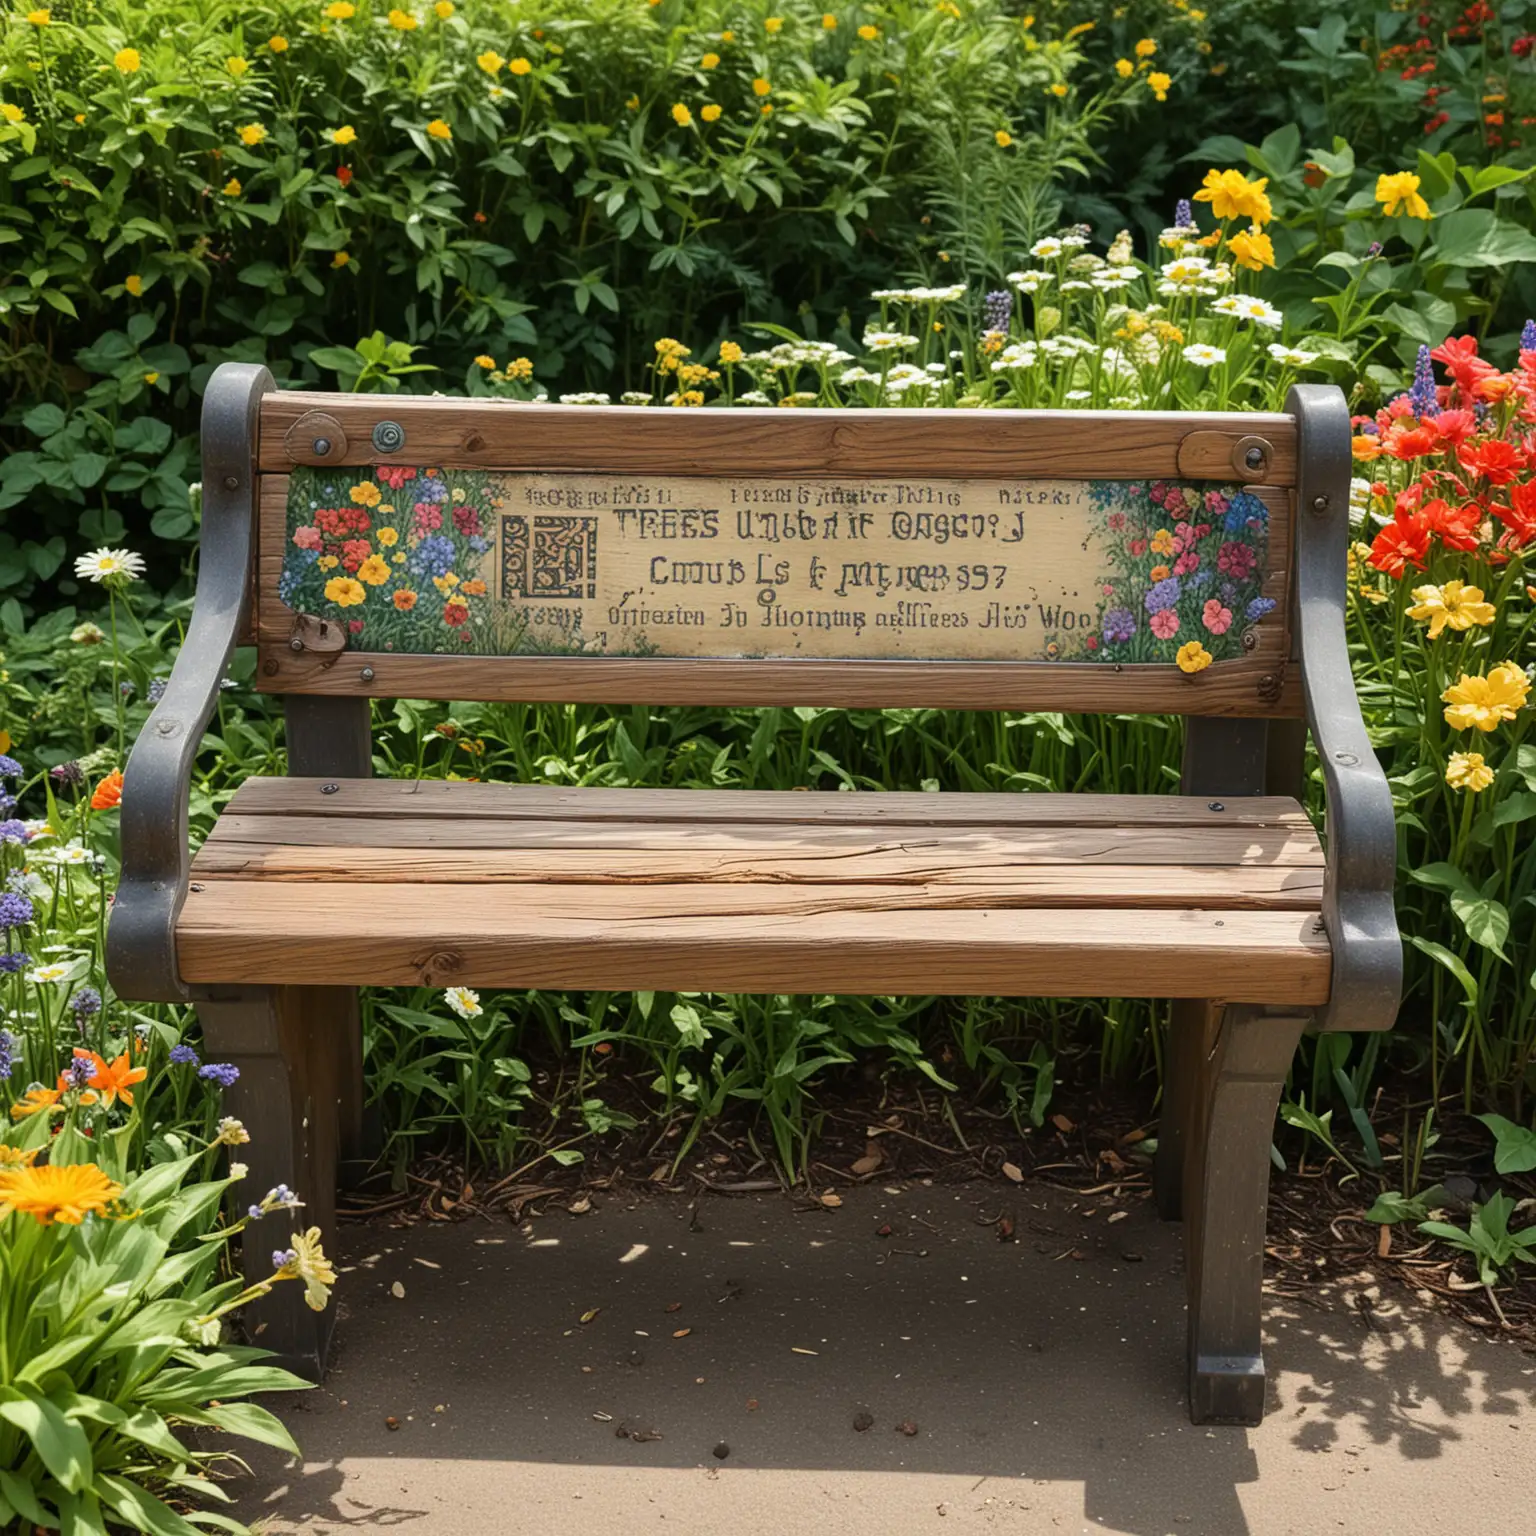 Rustic Wooden Park Bench with Engraved QR Code in Colorful Garden